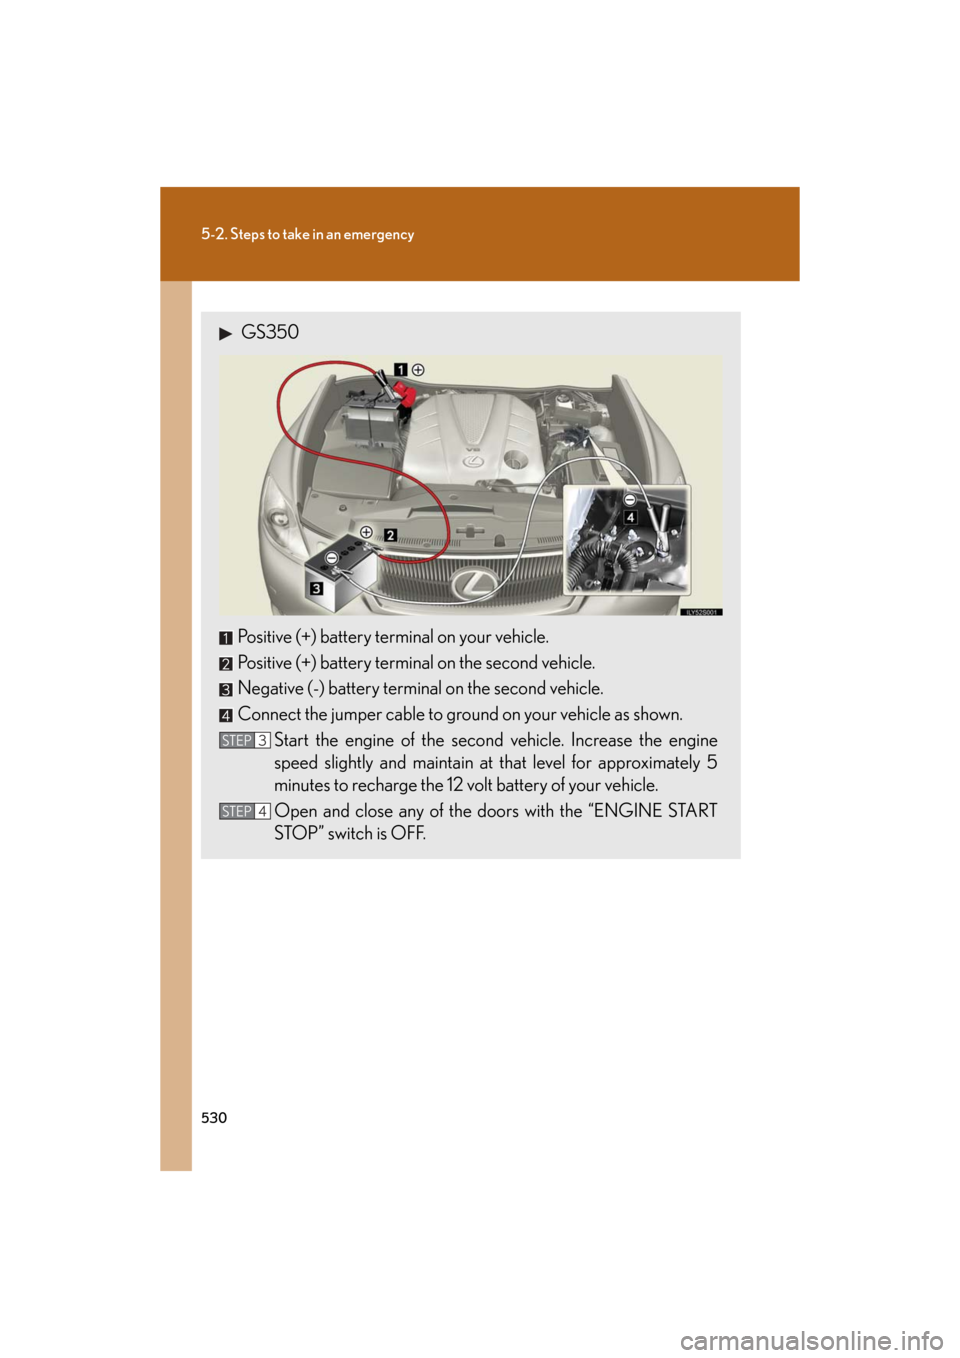 Lexus GS350 2008  Do-it-yourself maintenance / LEXUS 2008 GS460/350 OWNERS MANUAL (OM30A87U) 530
5-2. Steps to take in an emergency
GS_G_U
May 13, 2008 5:14 pm
 GS350
Positive (+) battery terminal on your vehicle.
Positive (+) battery terminal on the second vehicle.
Negative (-) battery termi